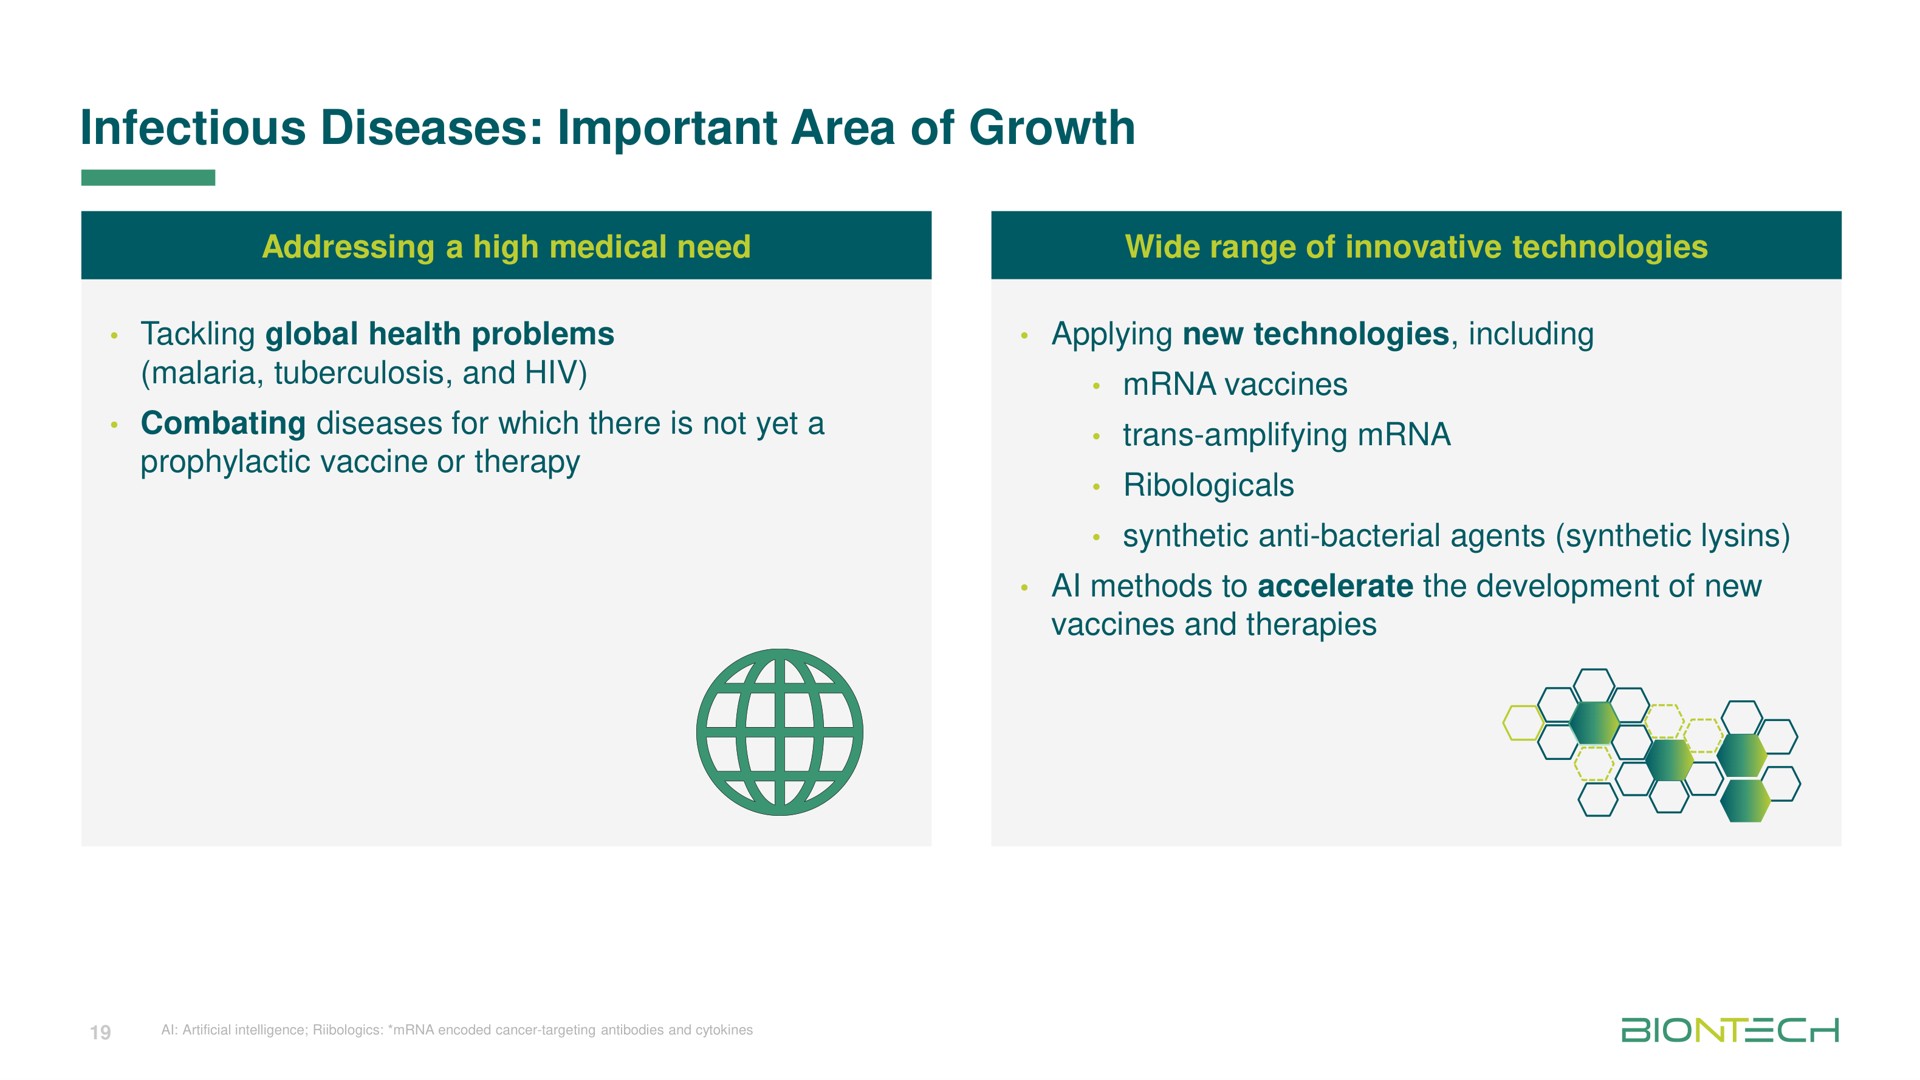 infectious diseases important area of growth | BioNTech